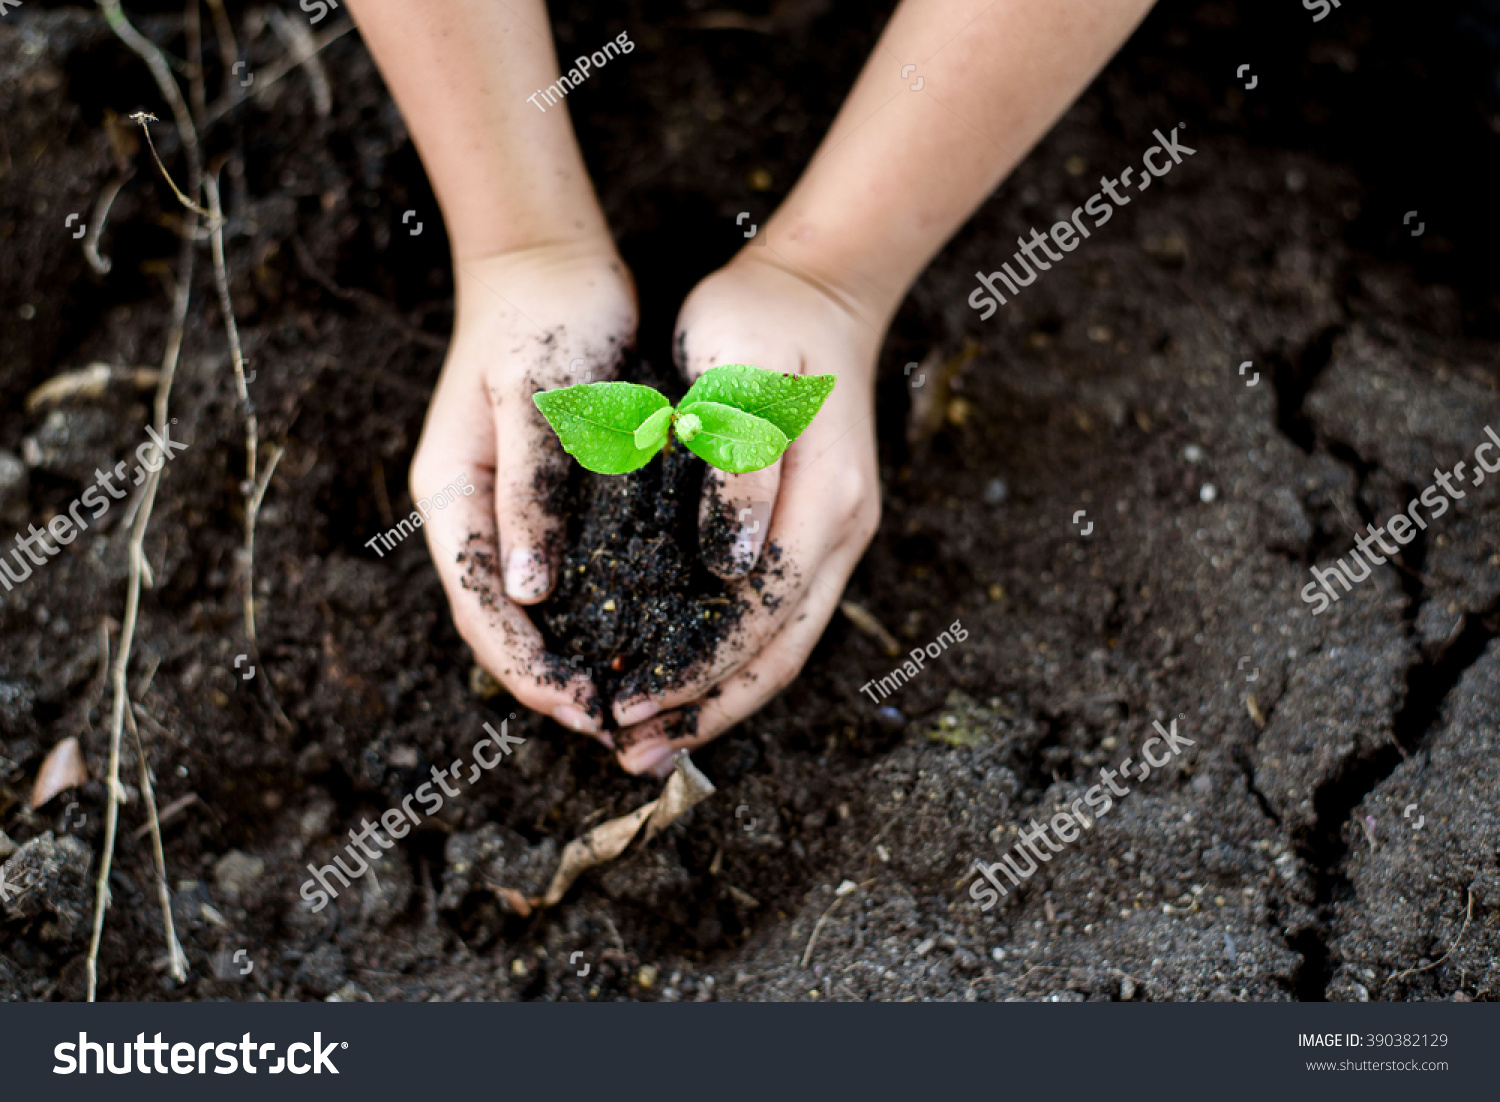 Selective focus on Little seedling in black soil on child hand. Earth day concept. #390382129